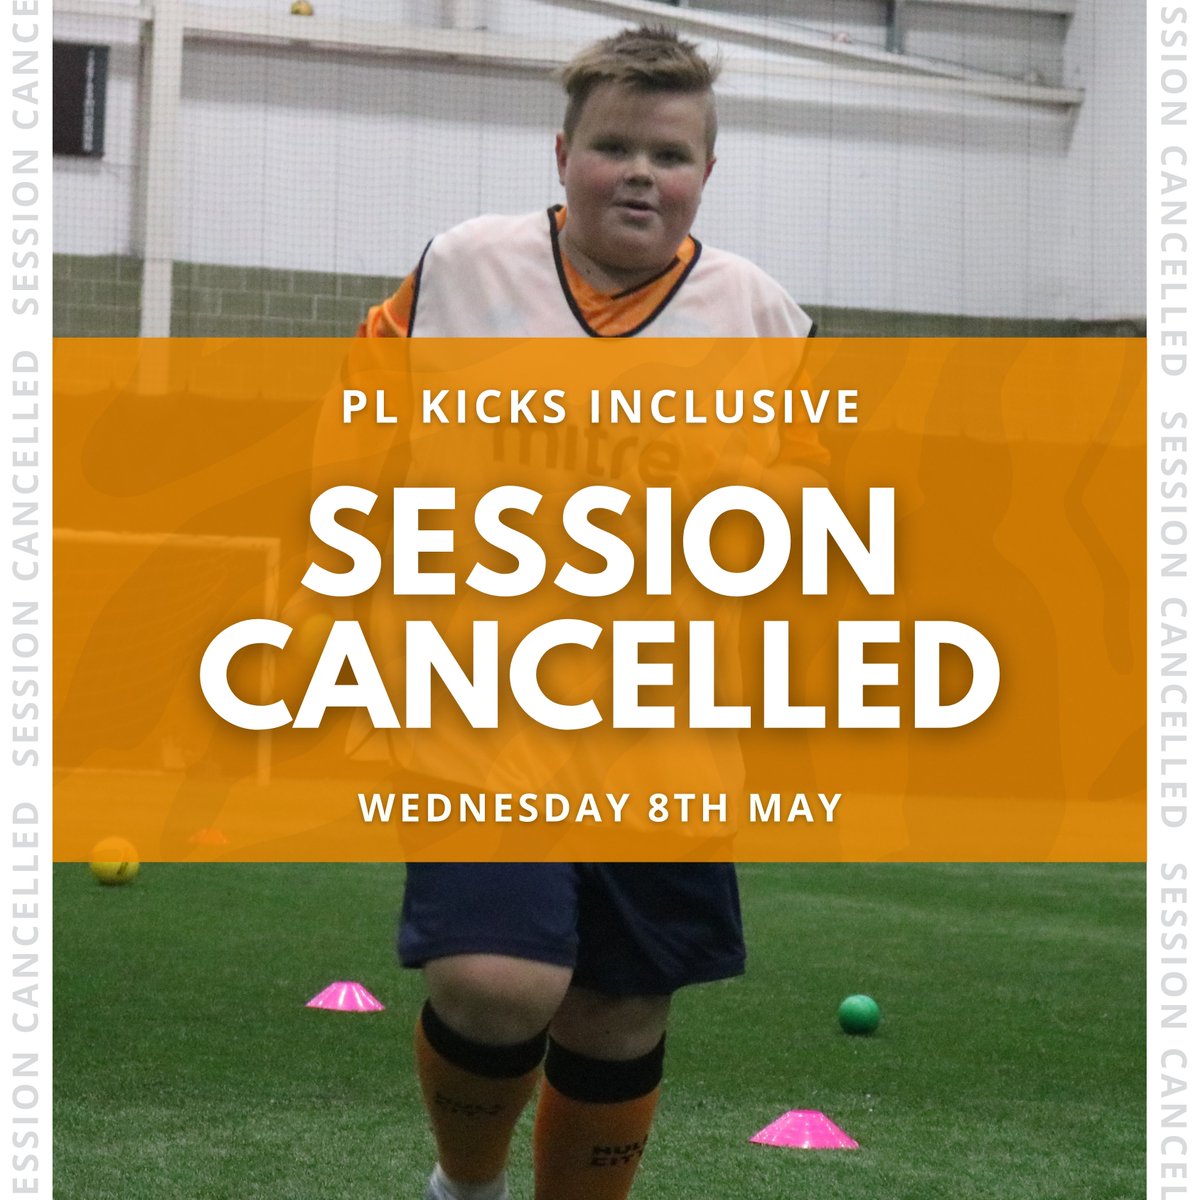 🚨 𝗦𝗘𝗦𝗦𝗜𝗢𝗡 𝗖𝗔𝗡𝗖𝗘𝗟𝗟𝗘𝗗 🚨

Please be advised that our #PLKicks Inclusive session scheduled for tomorrow evening at Winifred Holtby Sports Hall (17:30 to 19:00) has been cancelled due to unforeseen circumstances. 

We apologise for any inconvenience this may cause.